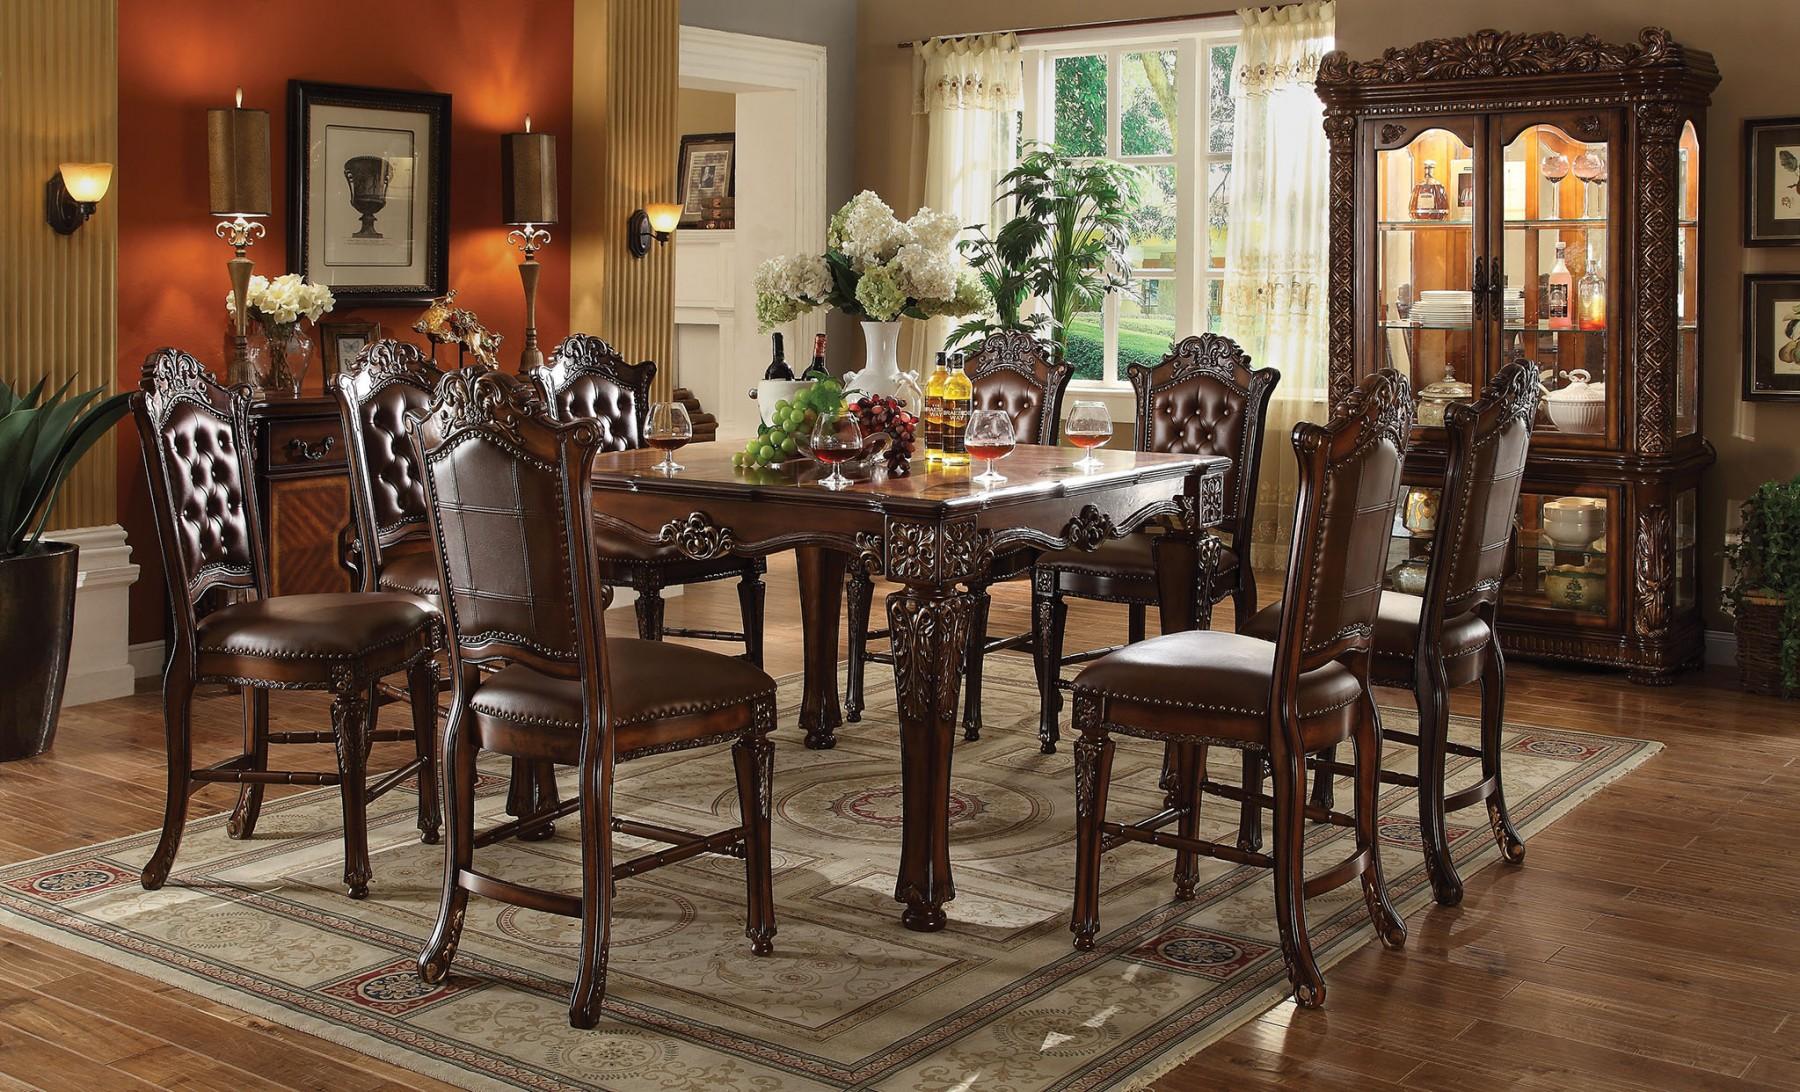 

    
Cherry Counter Height Dining Room Set 5 Pcs Classic Acme Furniture 62025 Vendome
